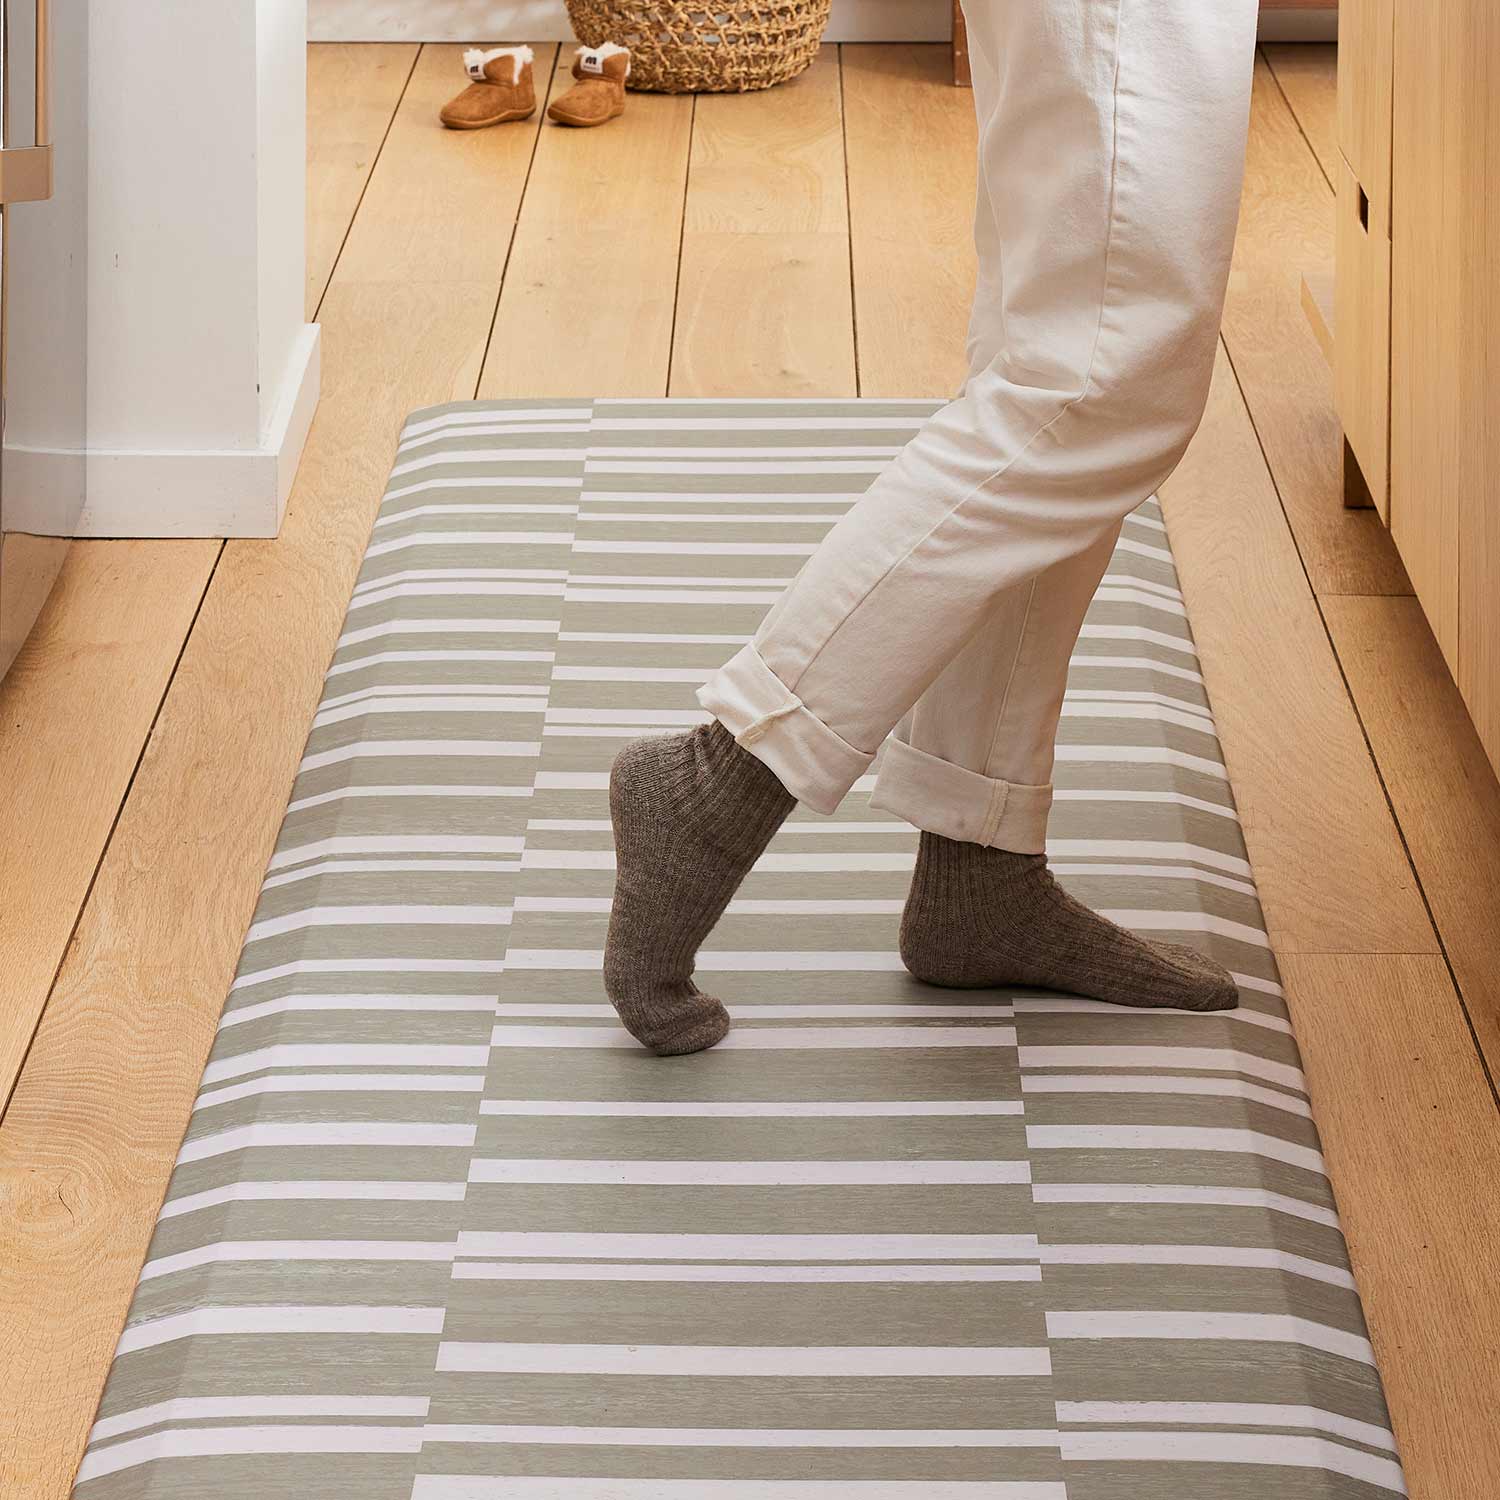 sutton stripe basil olive green and white inverted stripe standing mat shown in kitchen with womans legs in white jeans and gray socks standing on the mat